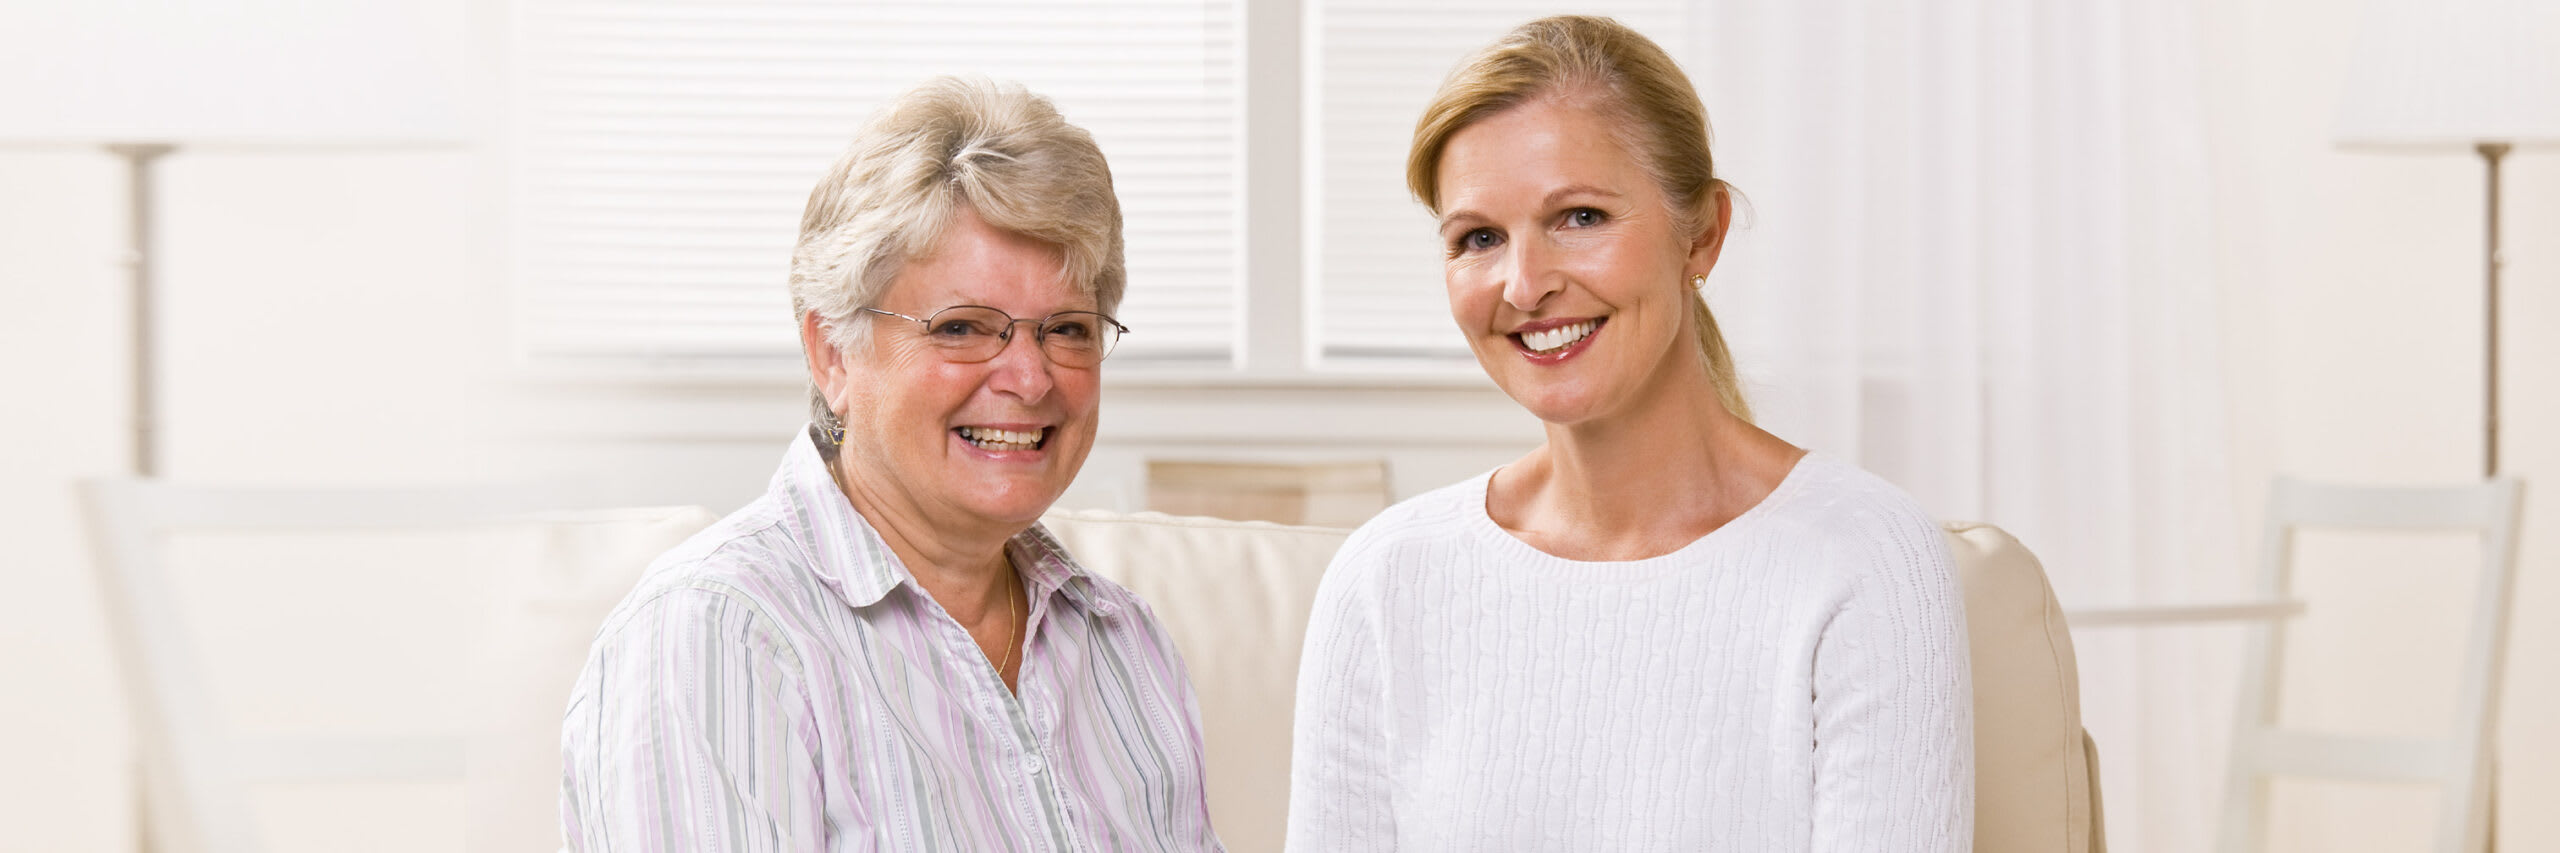 A home care worker and a senior woman smiling